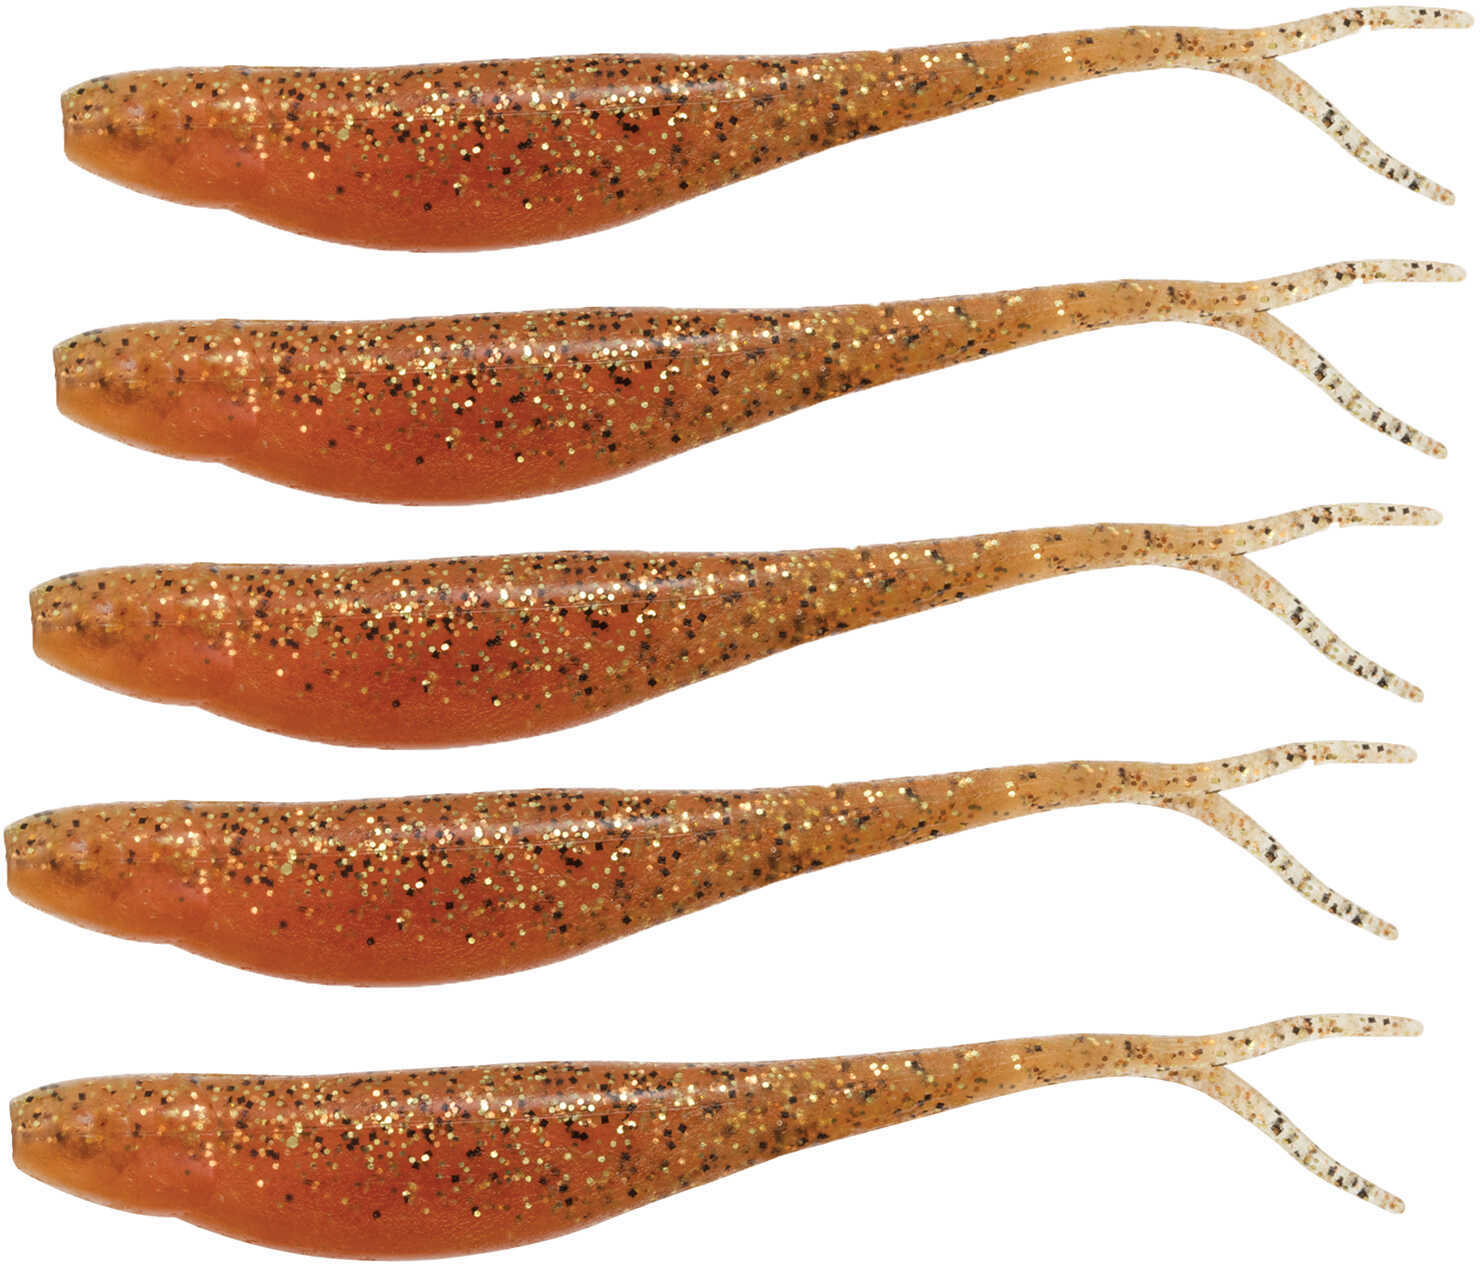 Z-Man / Chatterbait Scented Jerk ShadZ 5-Inch Lure New Penny 5-Pack Md: SJS5-261PK5